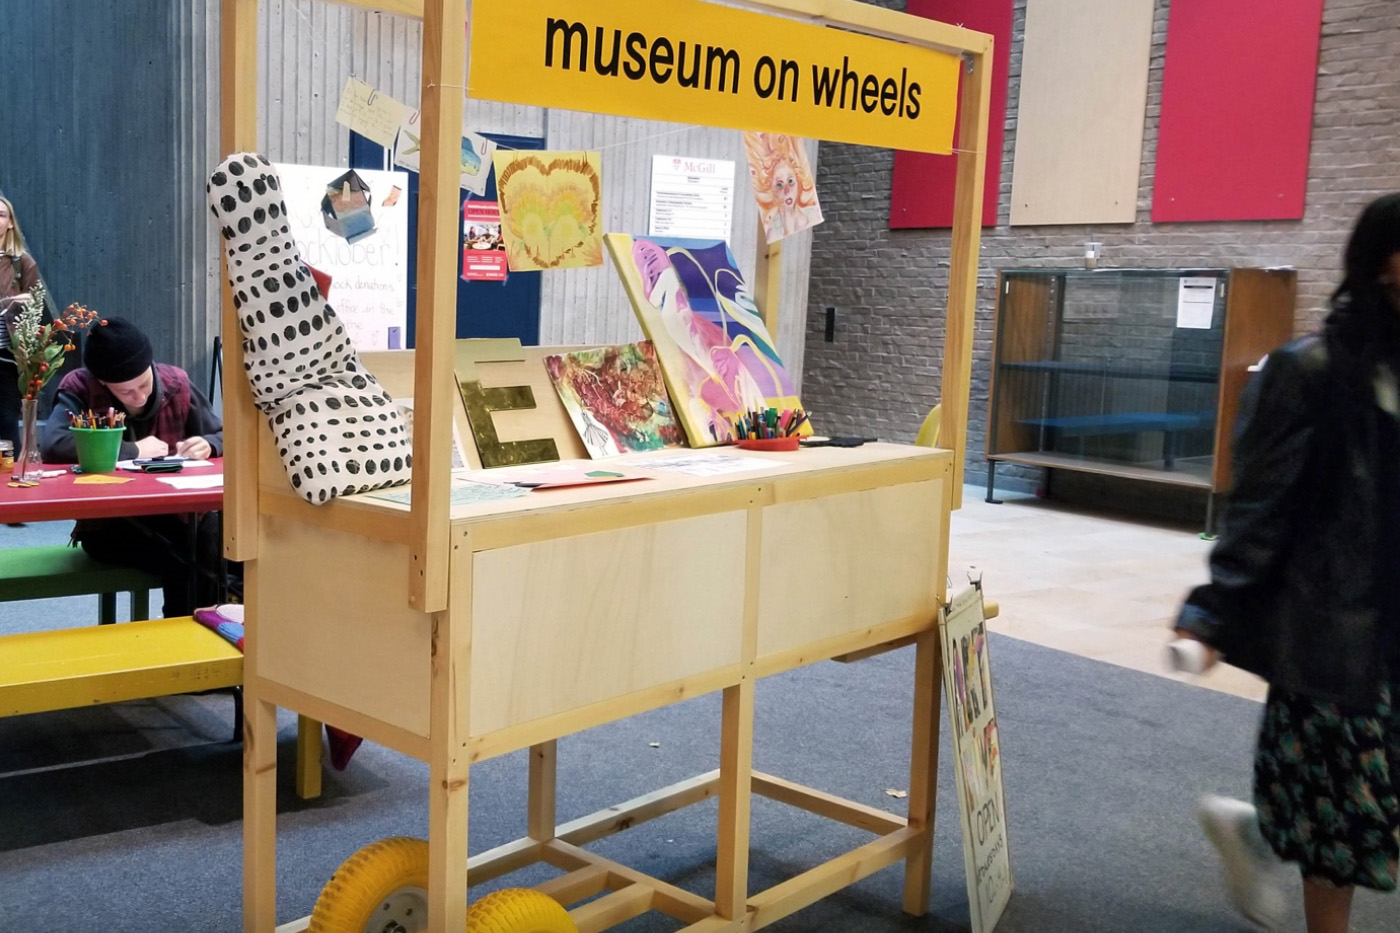 Museum on Wheels booth in the Education Building lobby